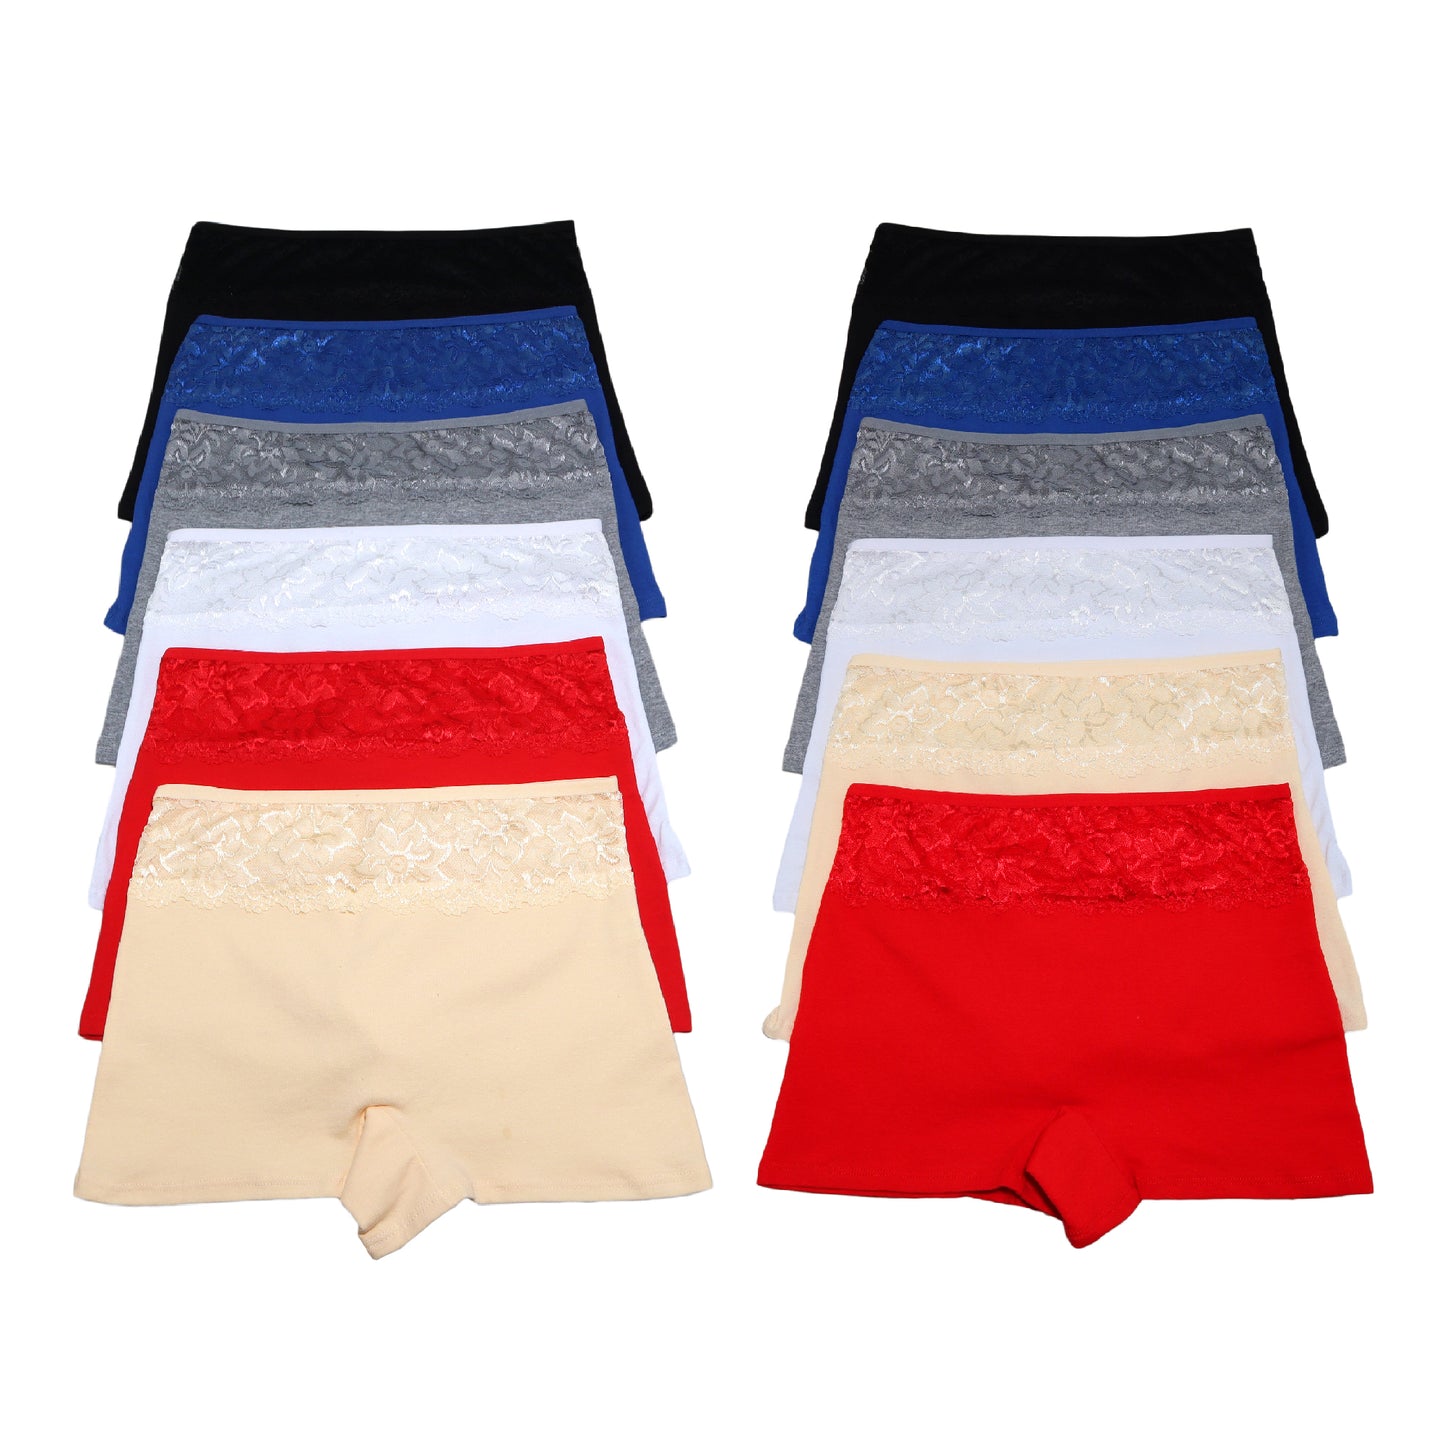 Classic Cotton Boyshort Panties with Lace Accent (12-Pack)